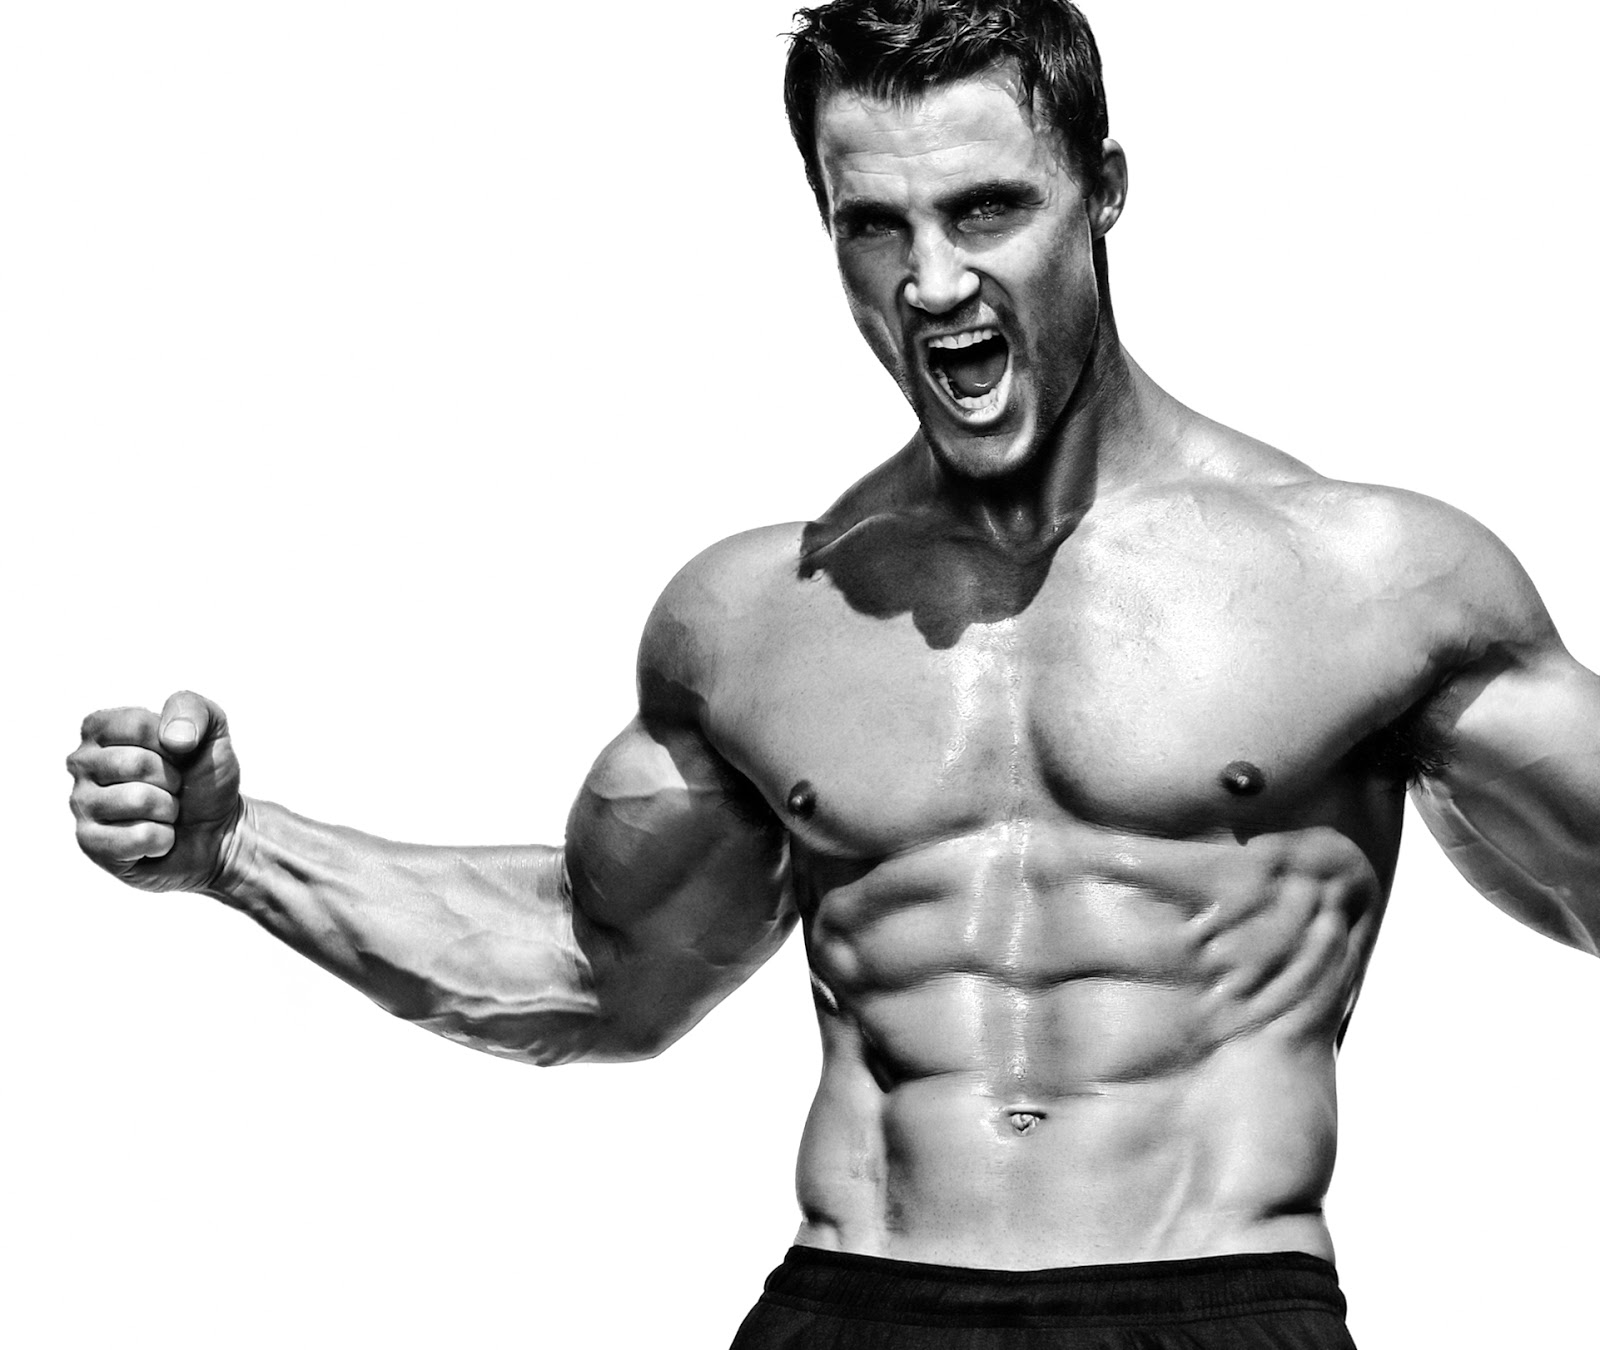 GREG PLITT - The Best Gallery Of The No. 1 Fitness Model In The World